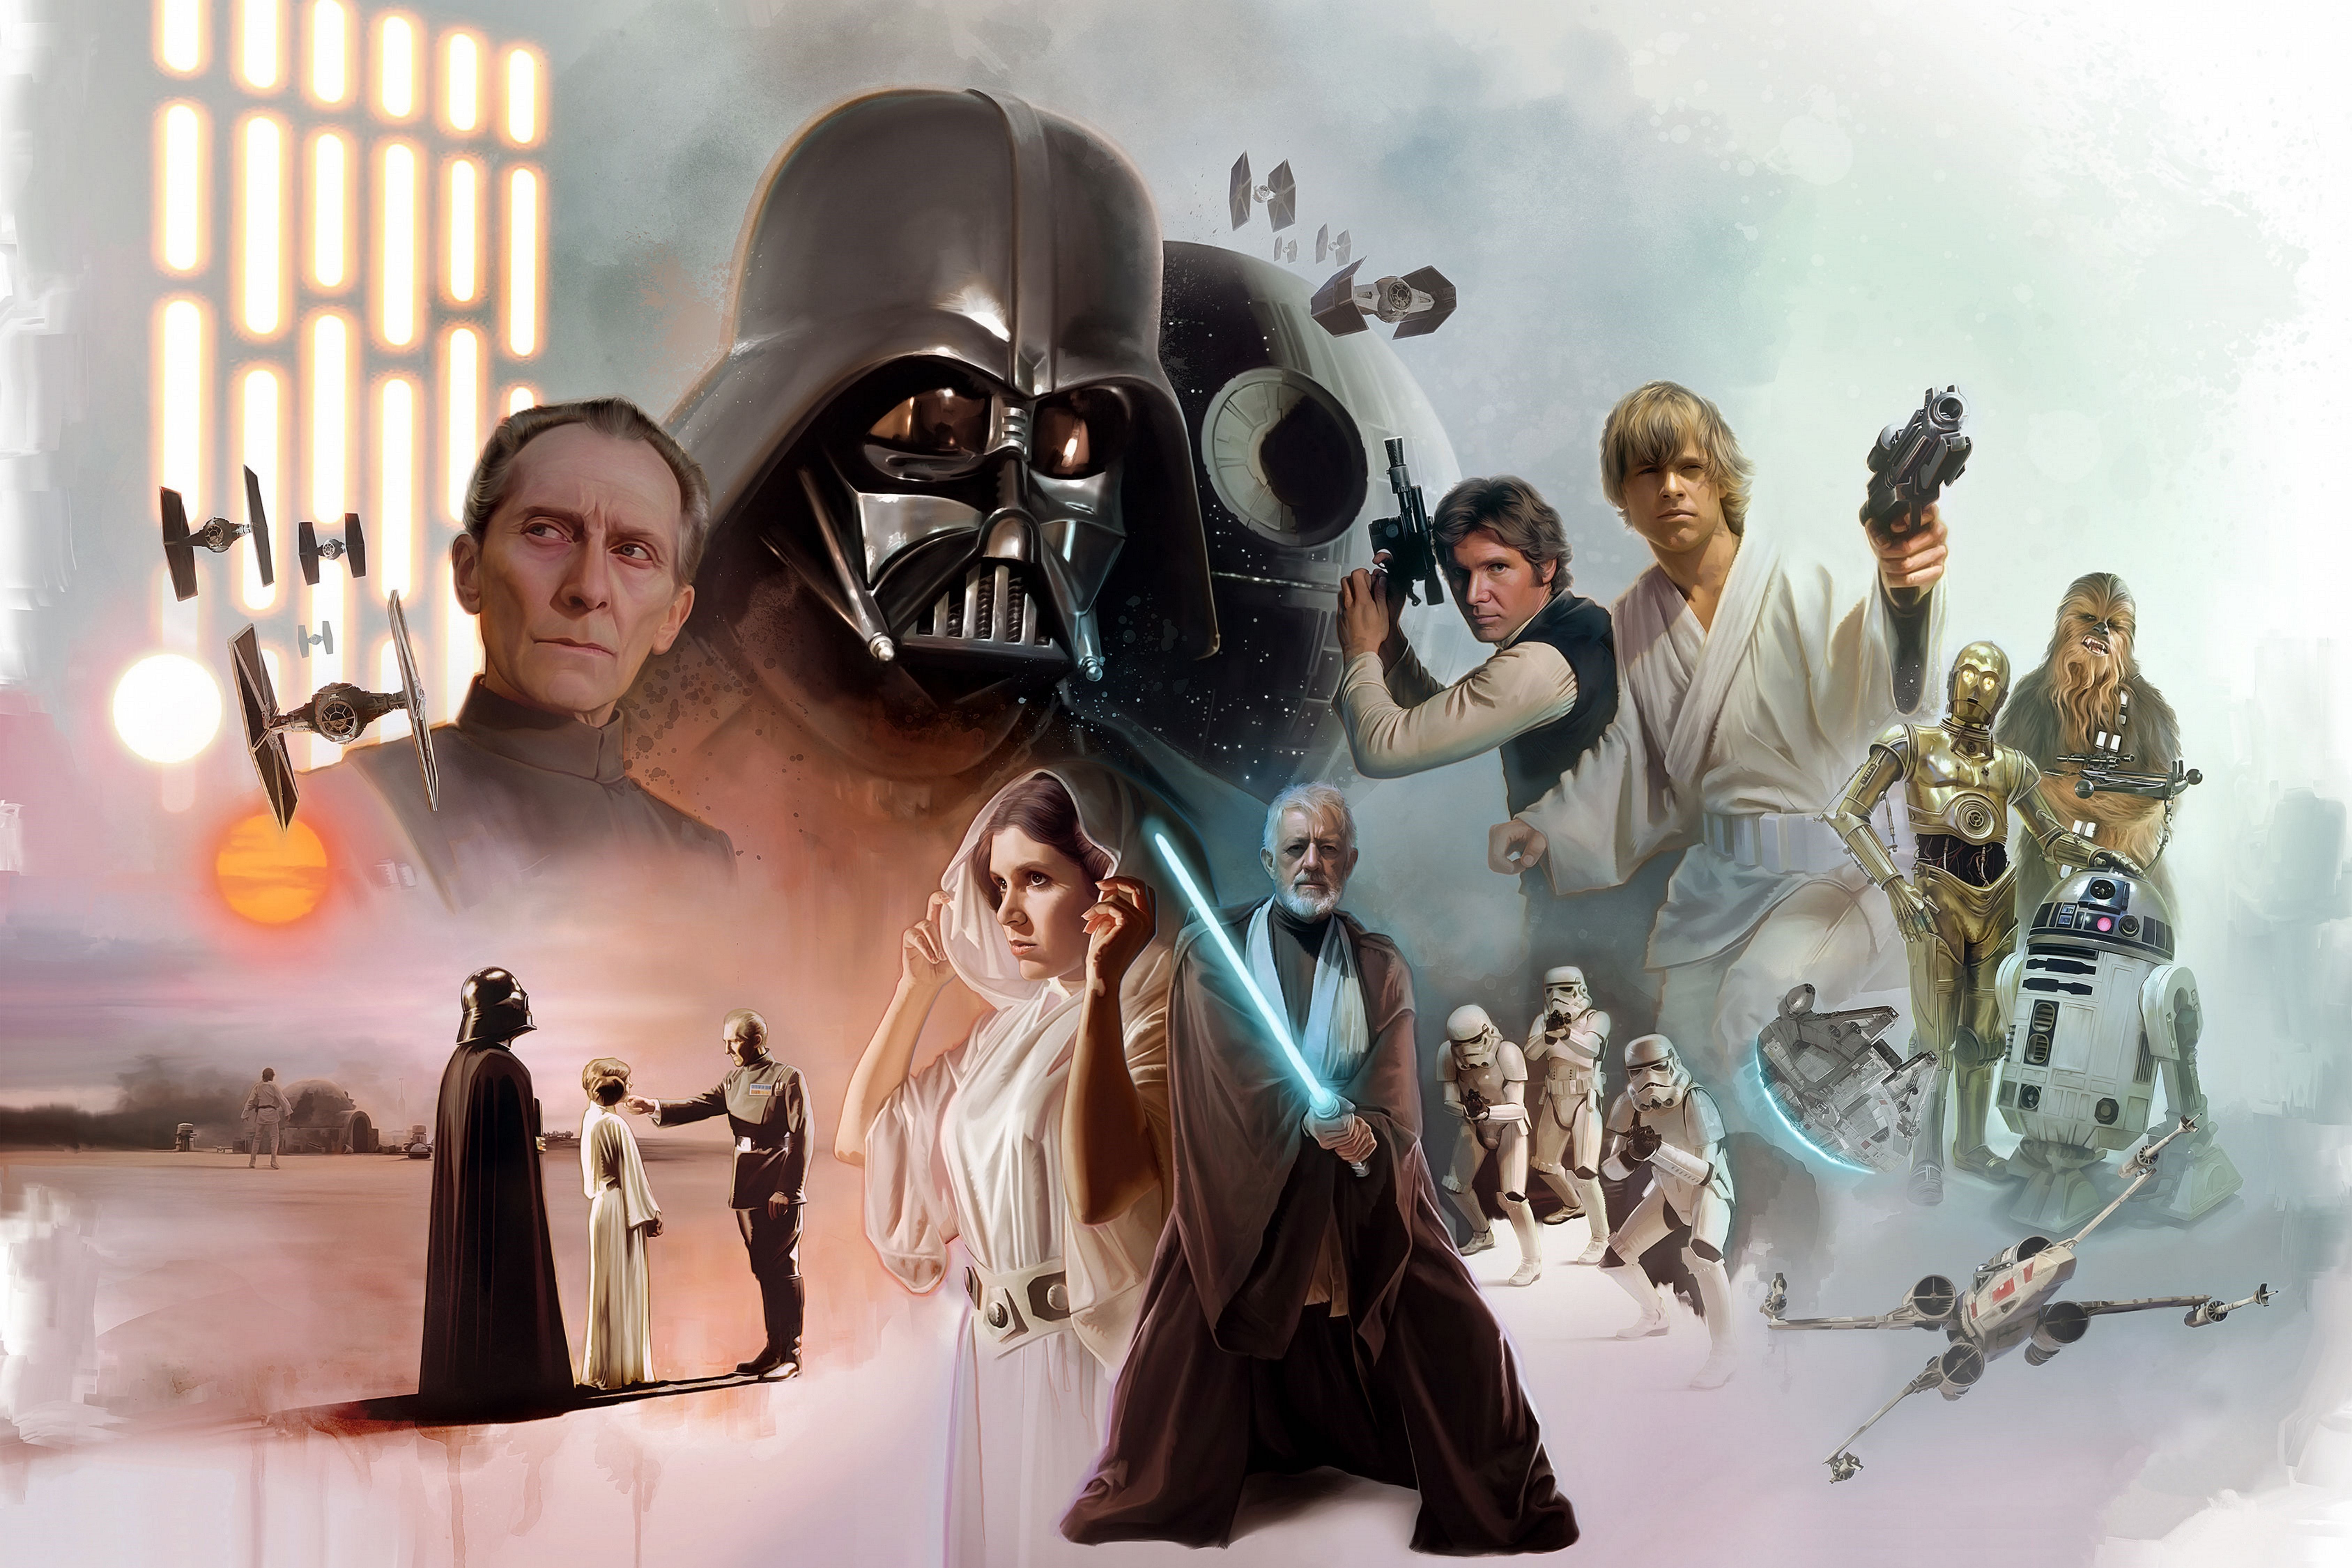 Came across this beautiful Star Wars Celebration wallpaper